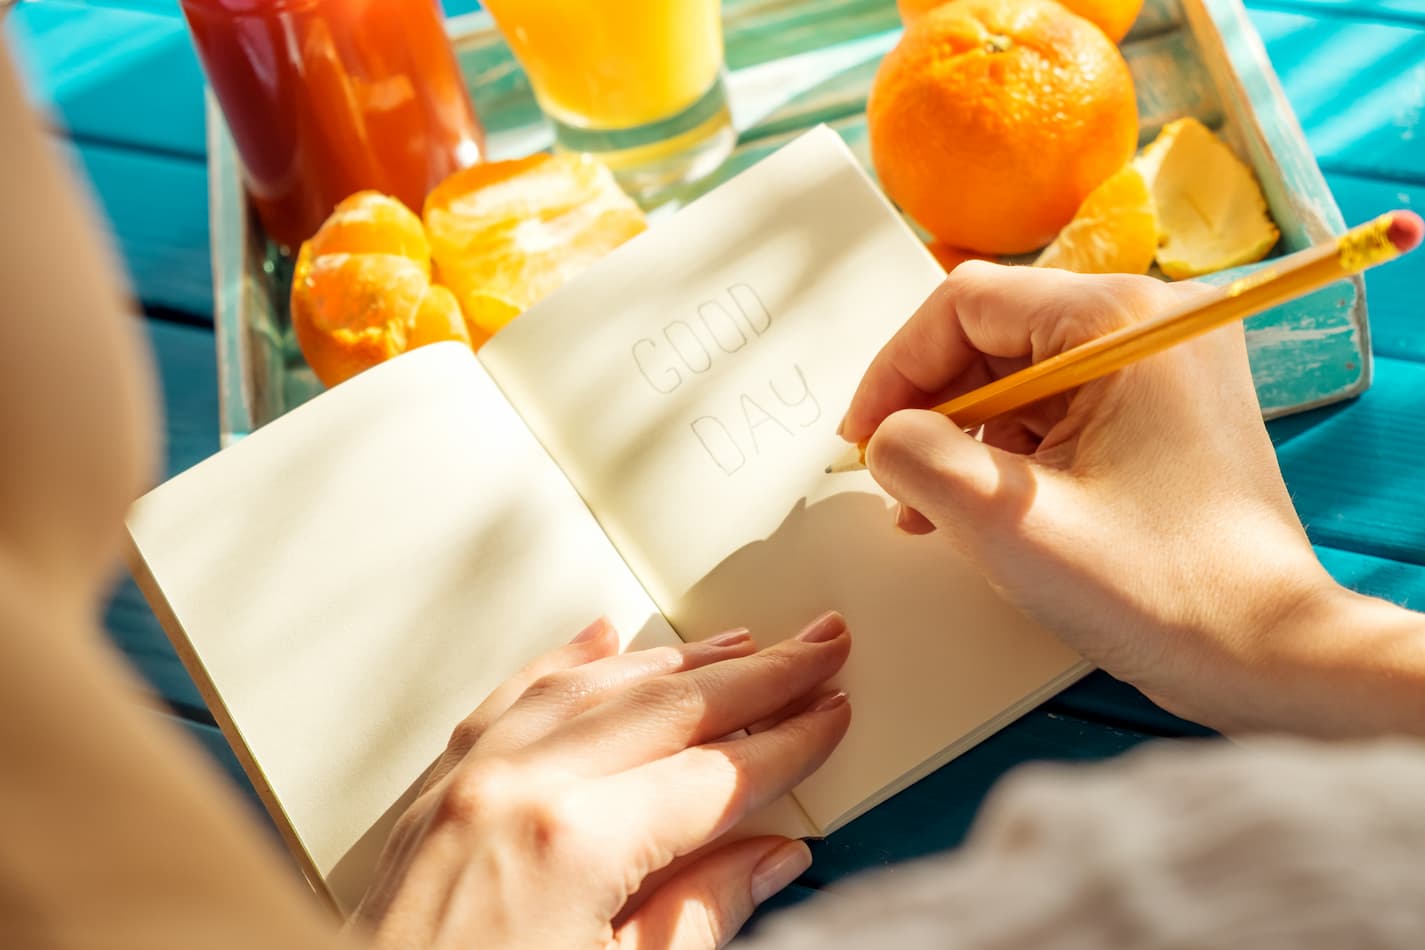 woman writing good day in a book with tray of citrus